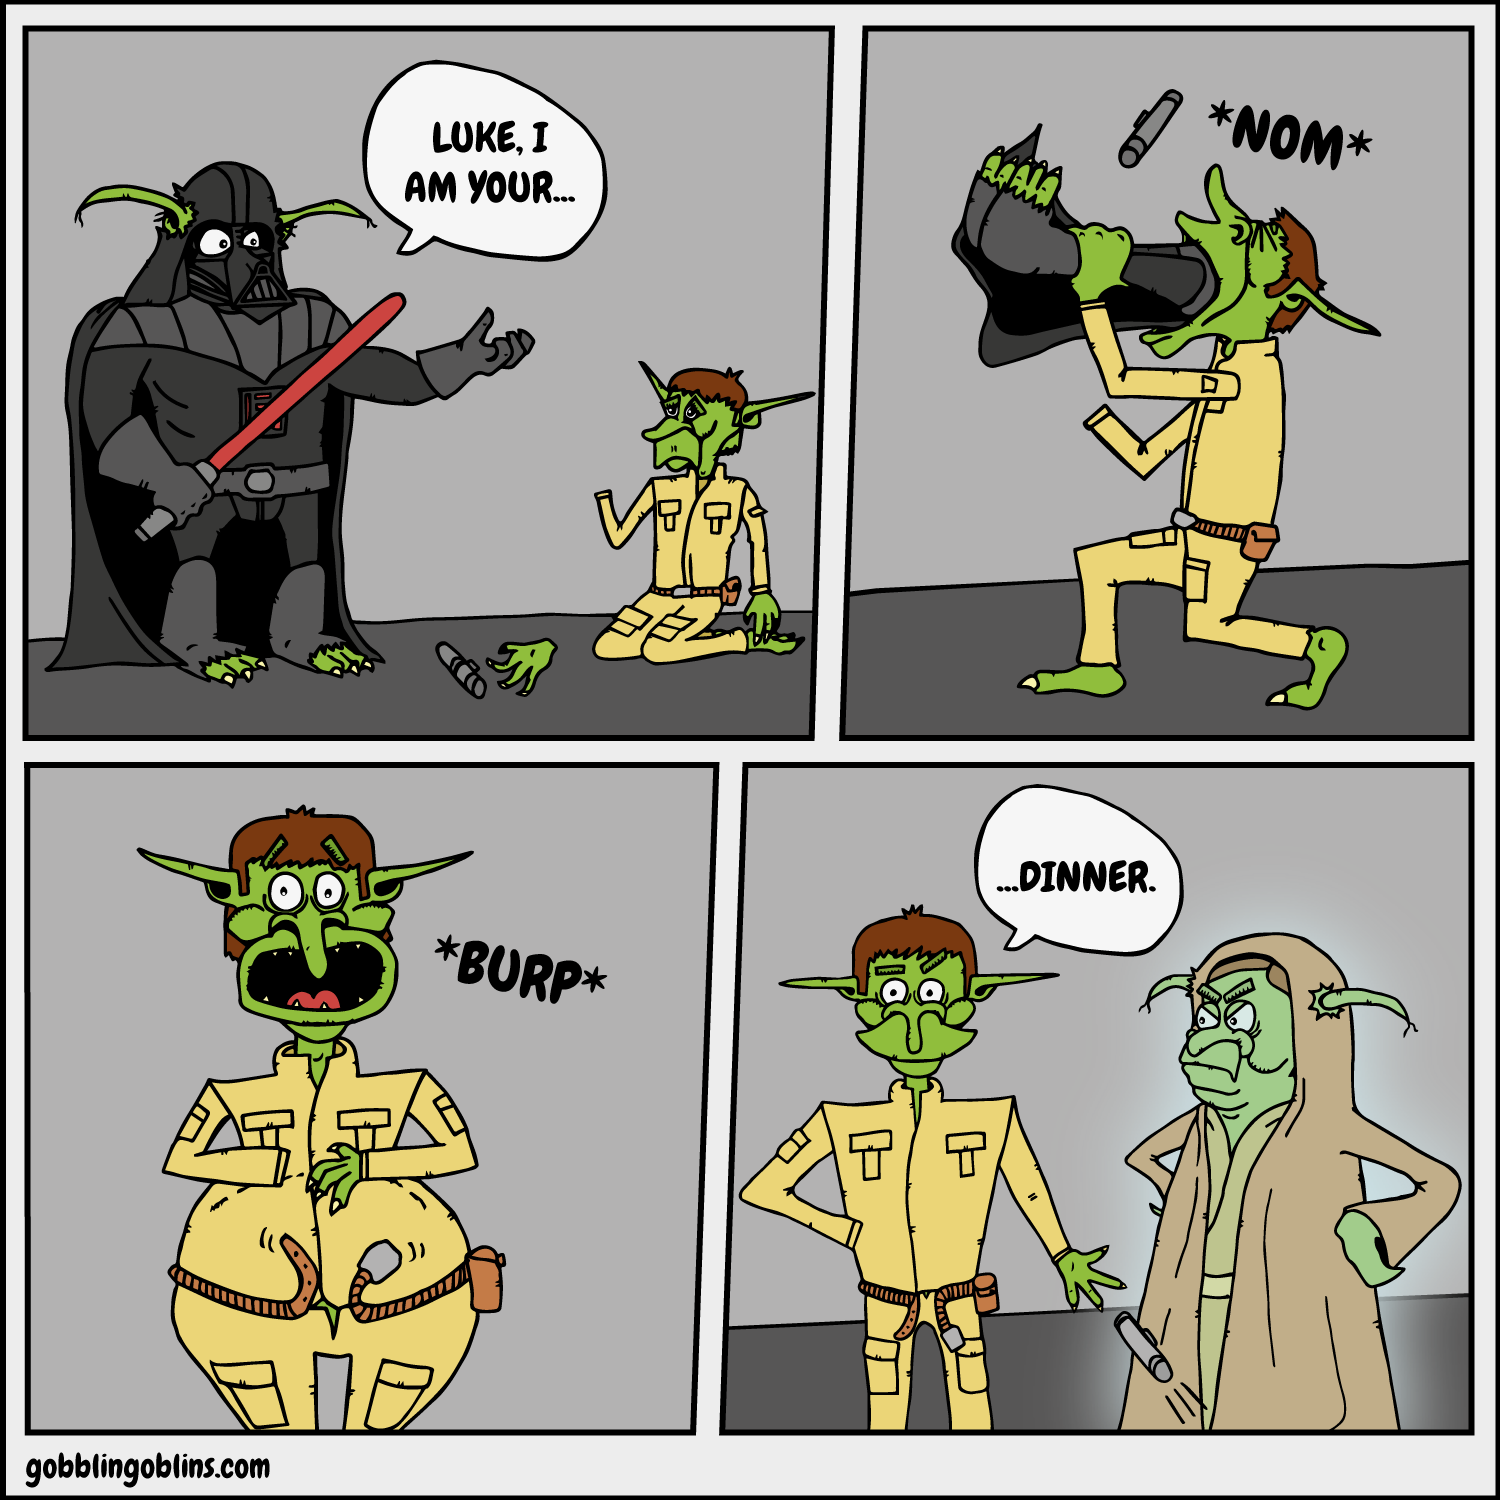 May The Fourth Be With You - a comic by Gobblin' Goblins